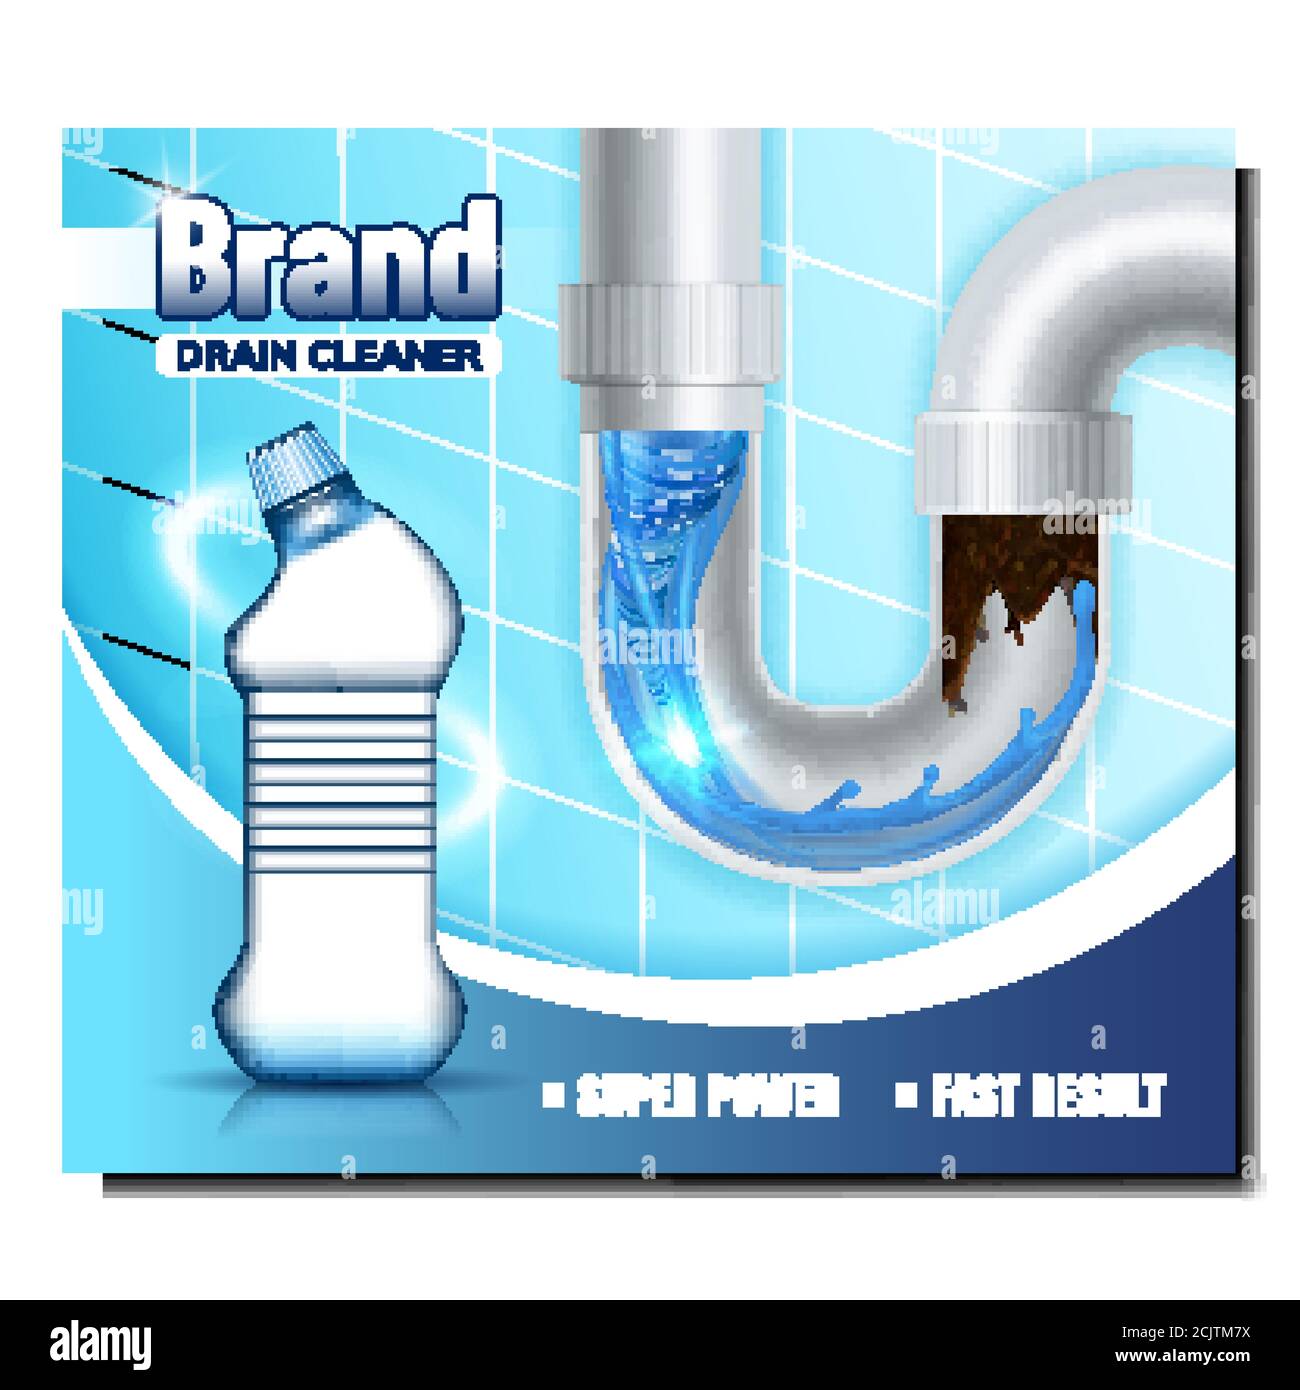 Drain cleaner Cut Out Stock Images & Pictures - Alamy